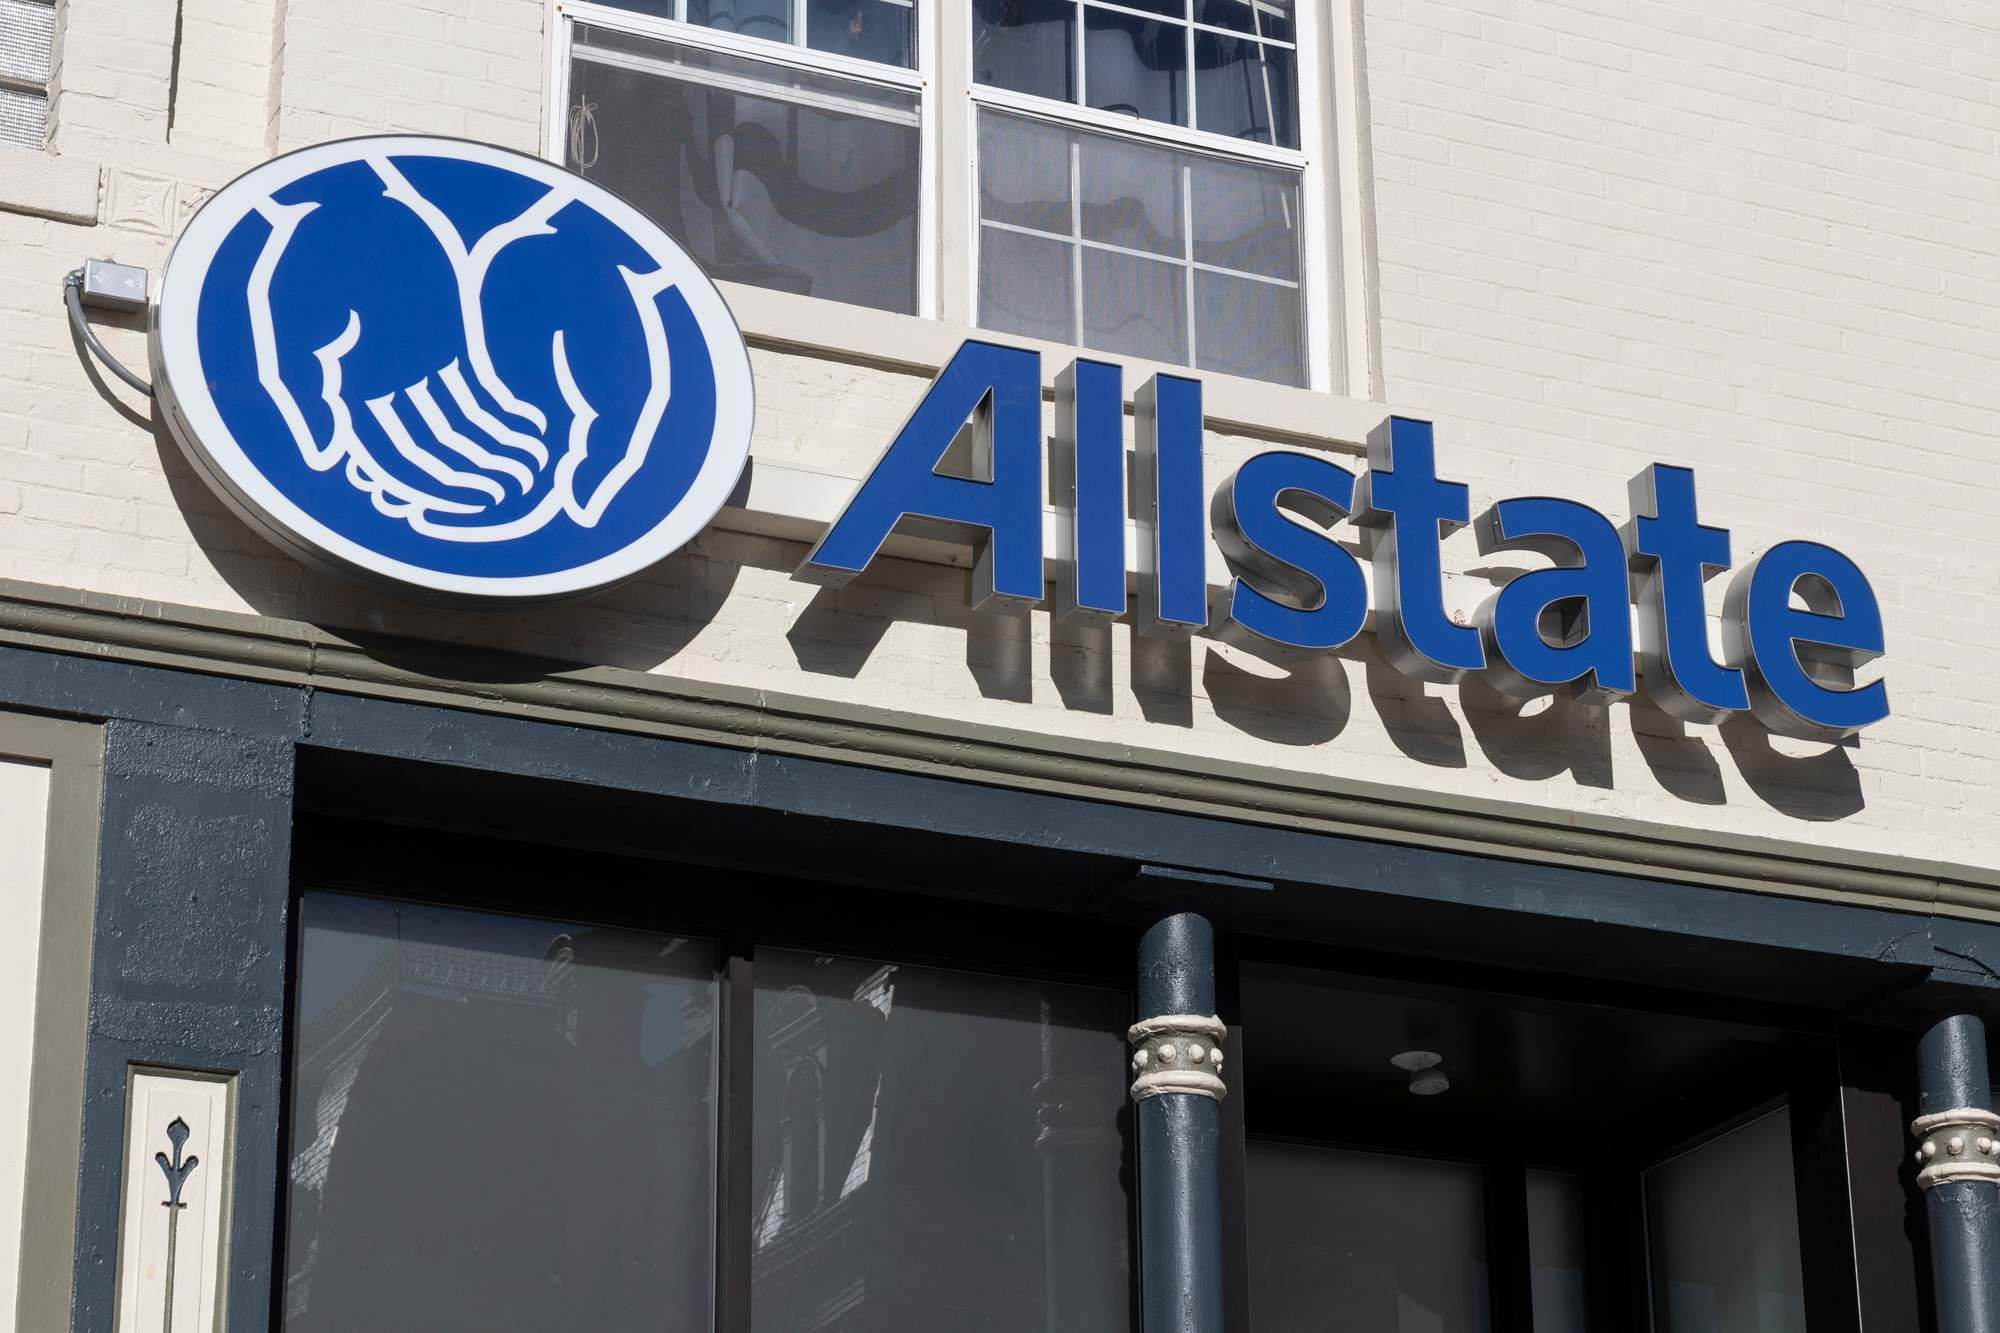 Allstate Sued for Repeat Telemarketing Calls, Violation of TCPA, Class